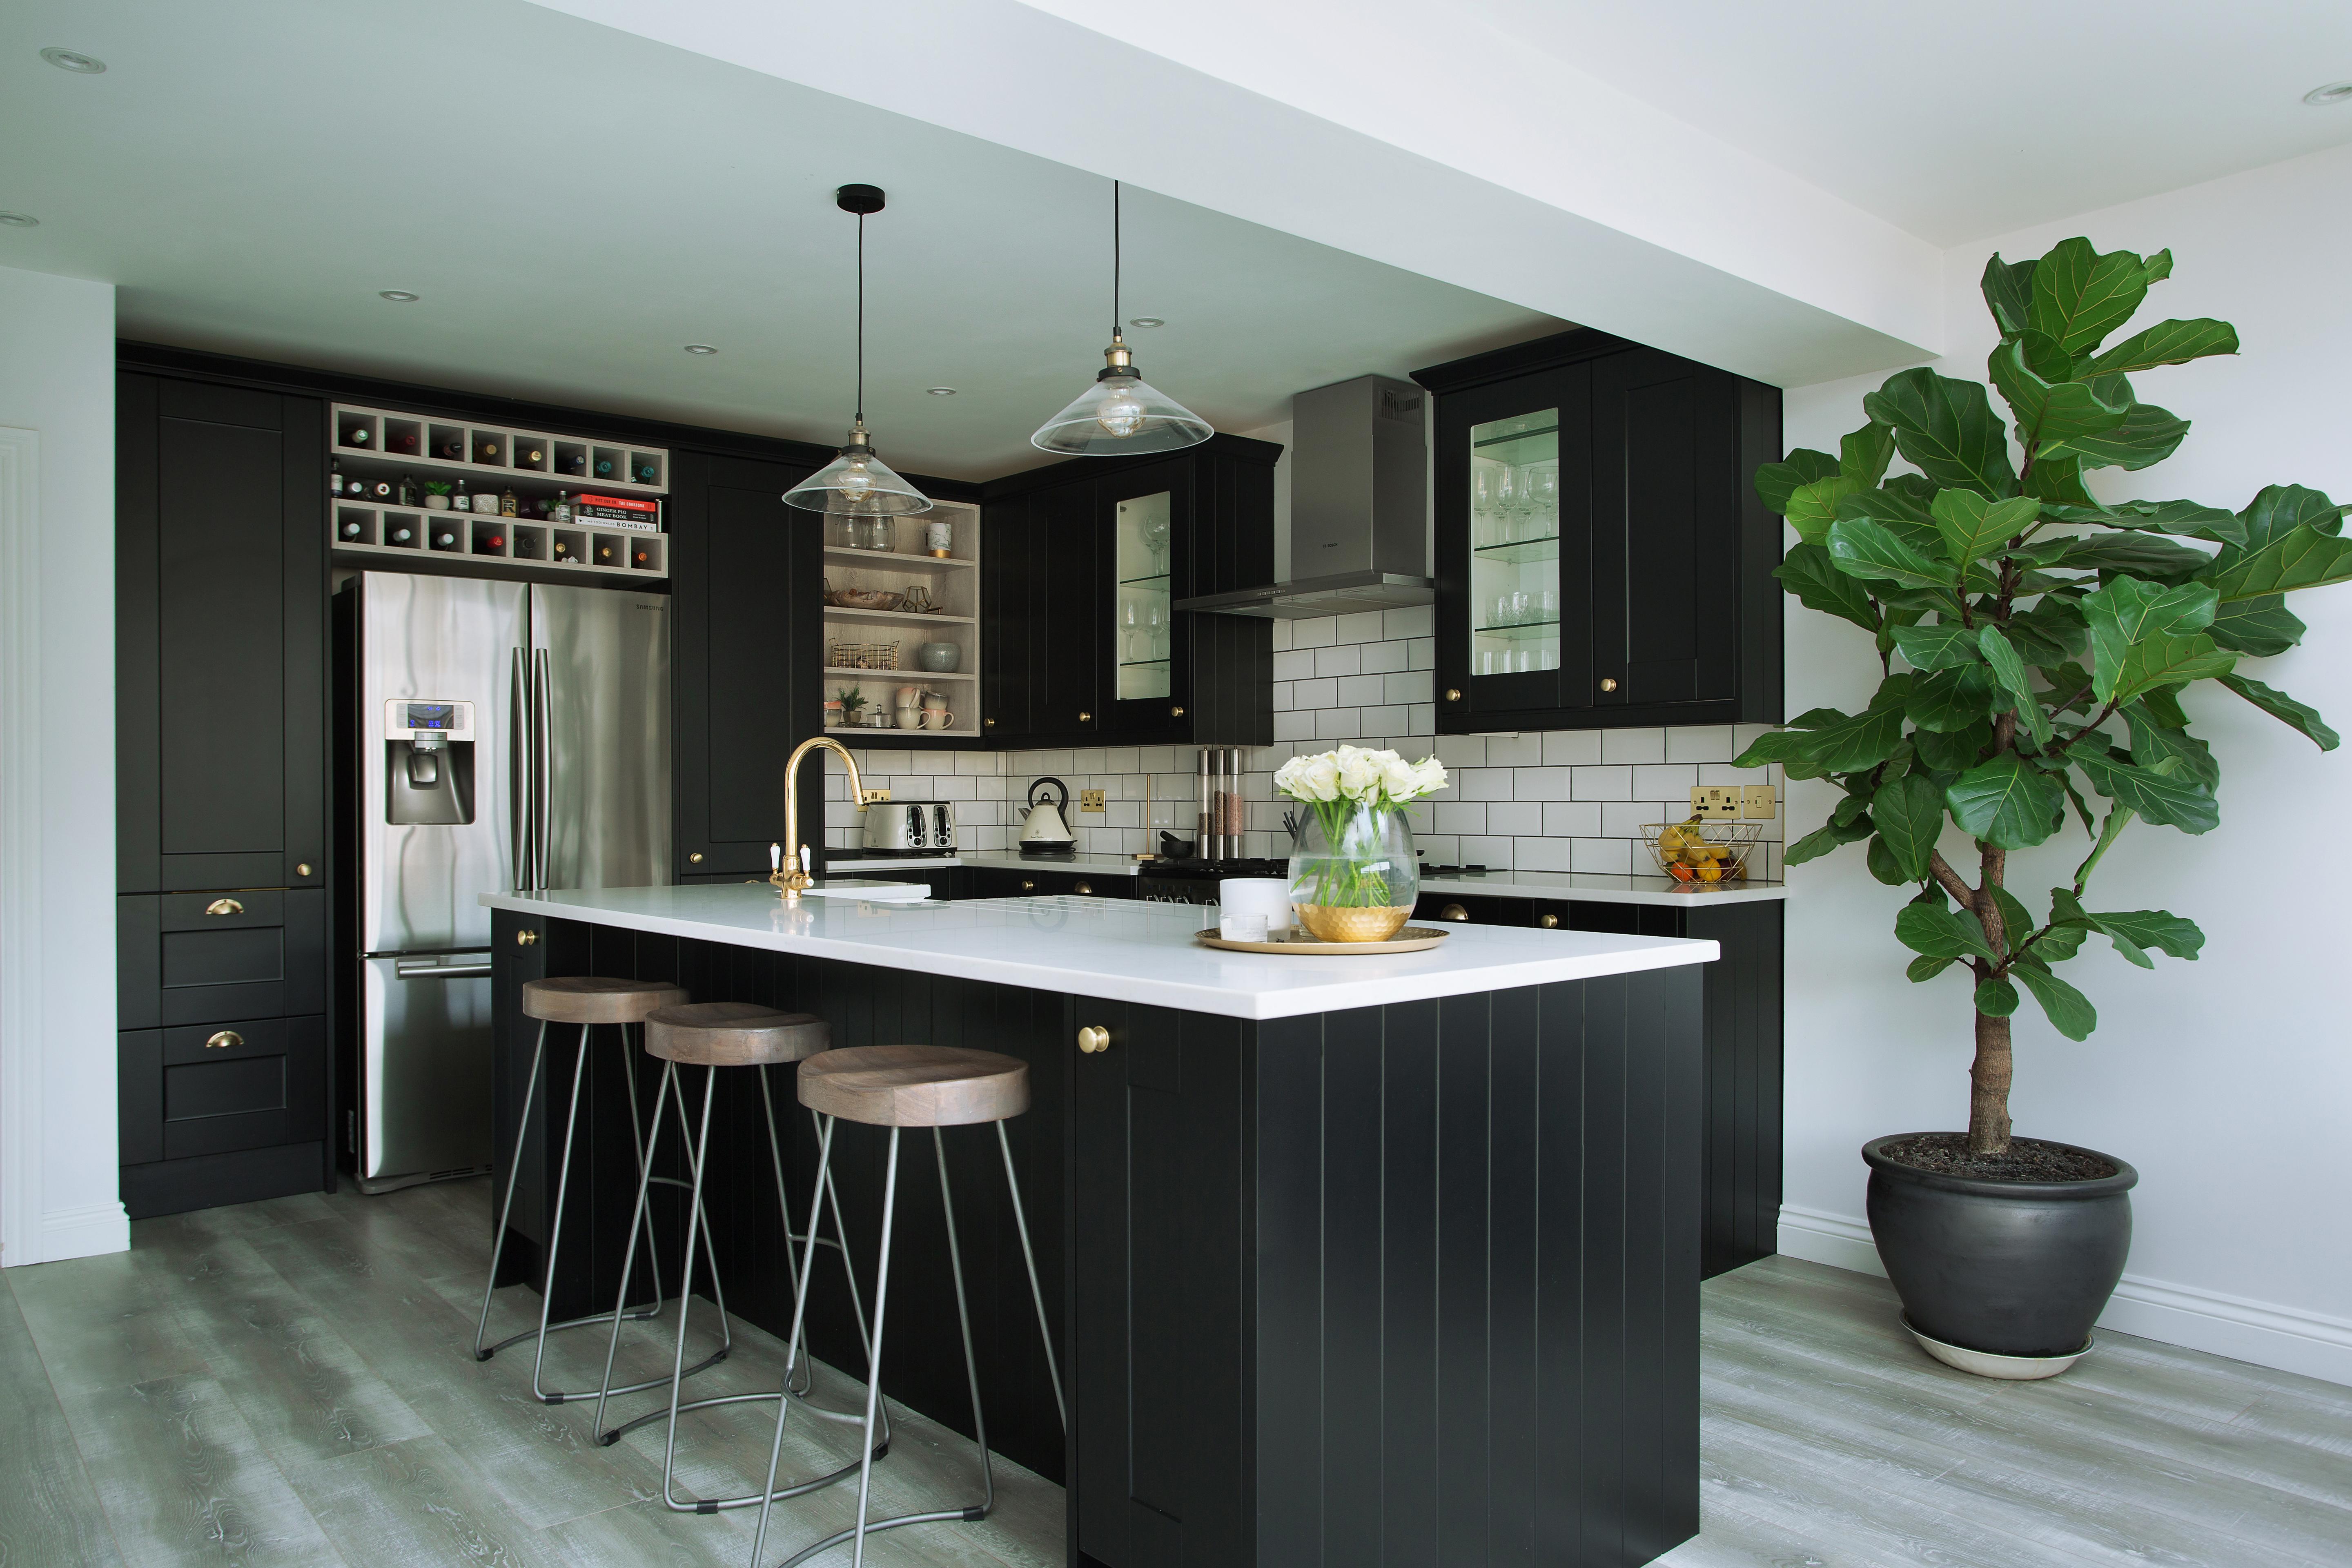 10 home design trends to watch for in 2019 The SpokesmanReview